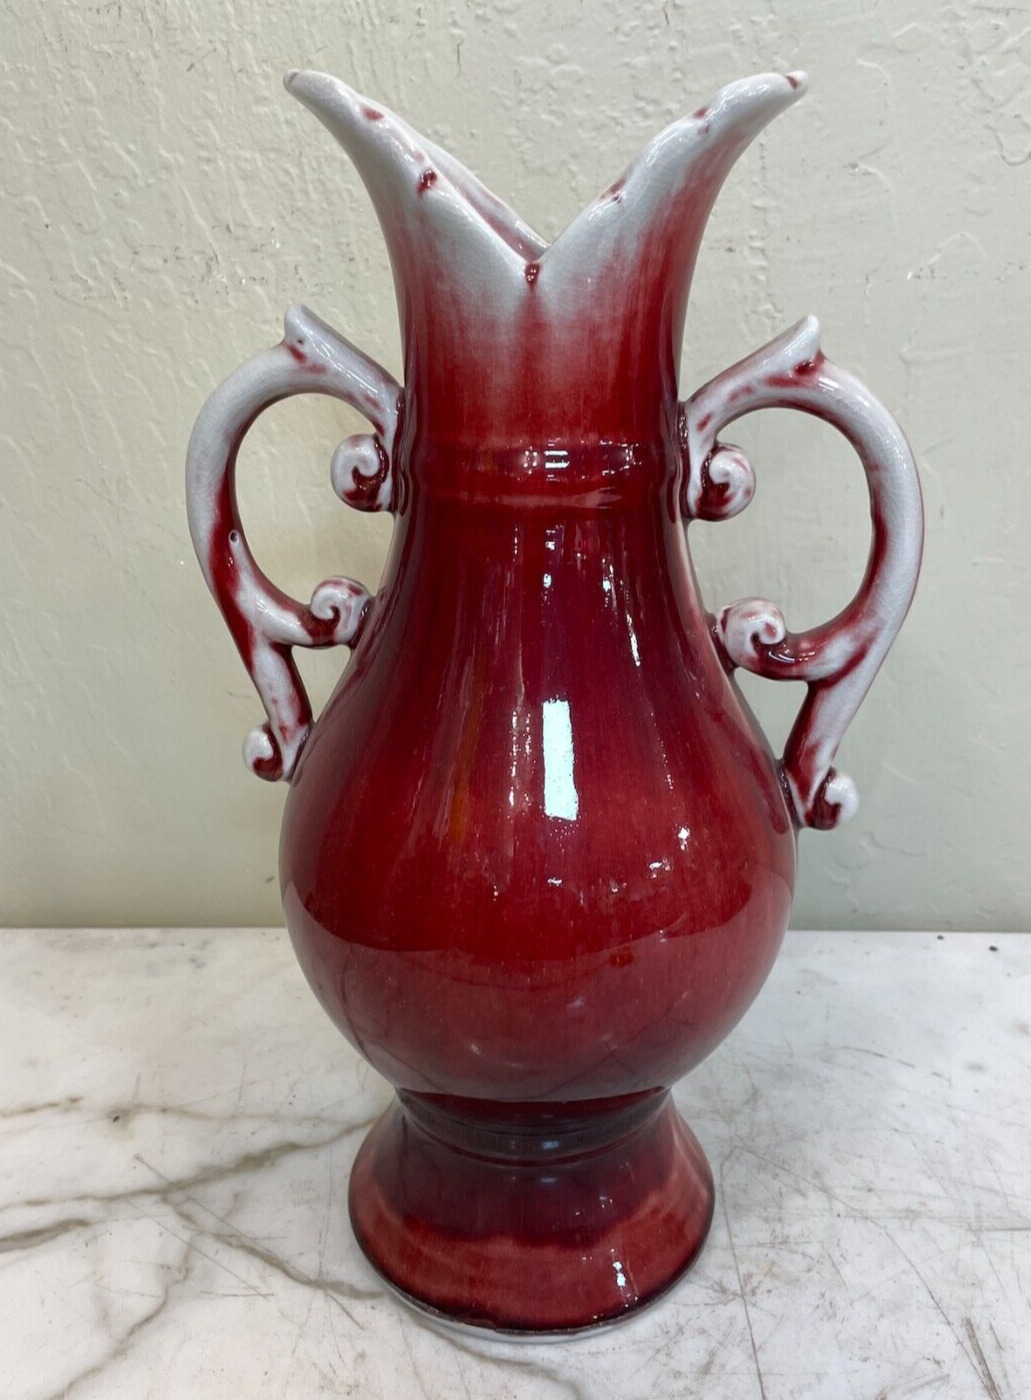 Unique Porcelain Red and White Vase with Handles